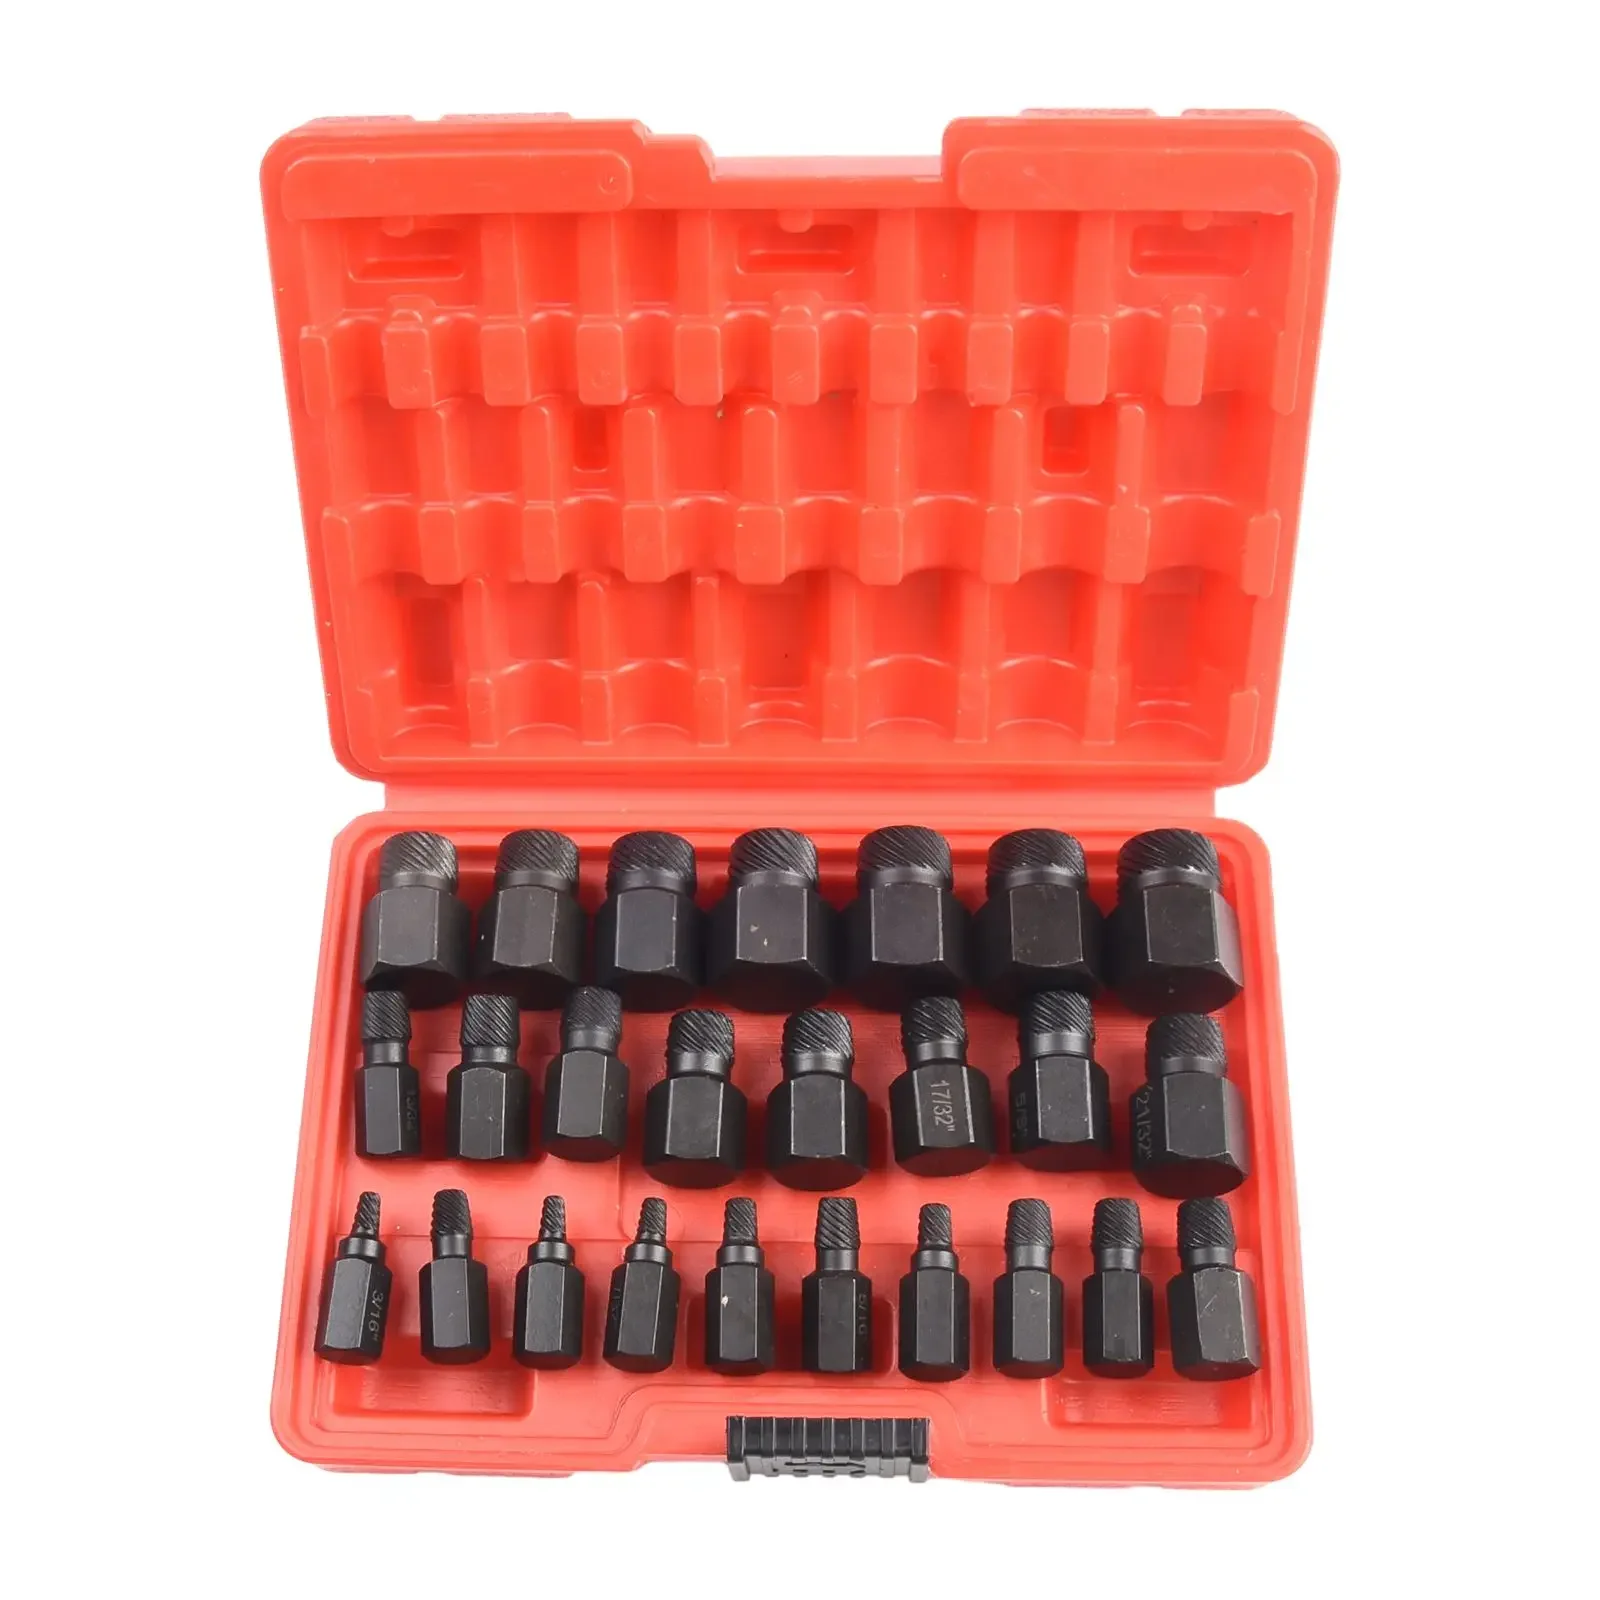 

Bolt Extractor Remove Tool Power Tools Imperial Left Spiral Design 1/8-7/8 25pcs Clear Scale Hex Head High Quality